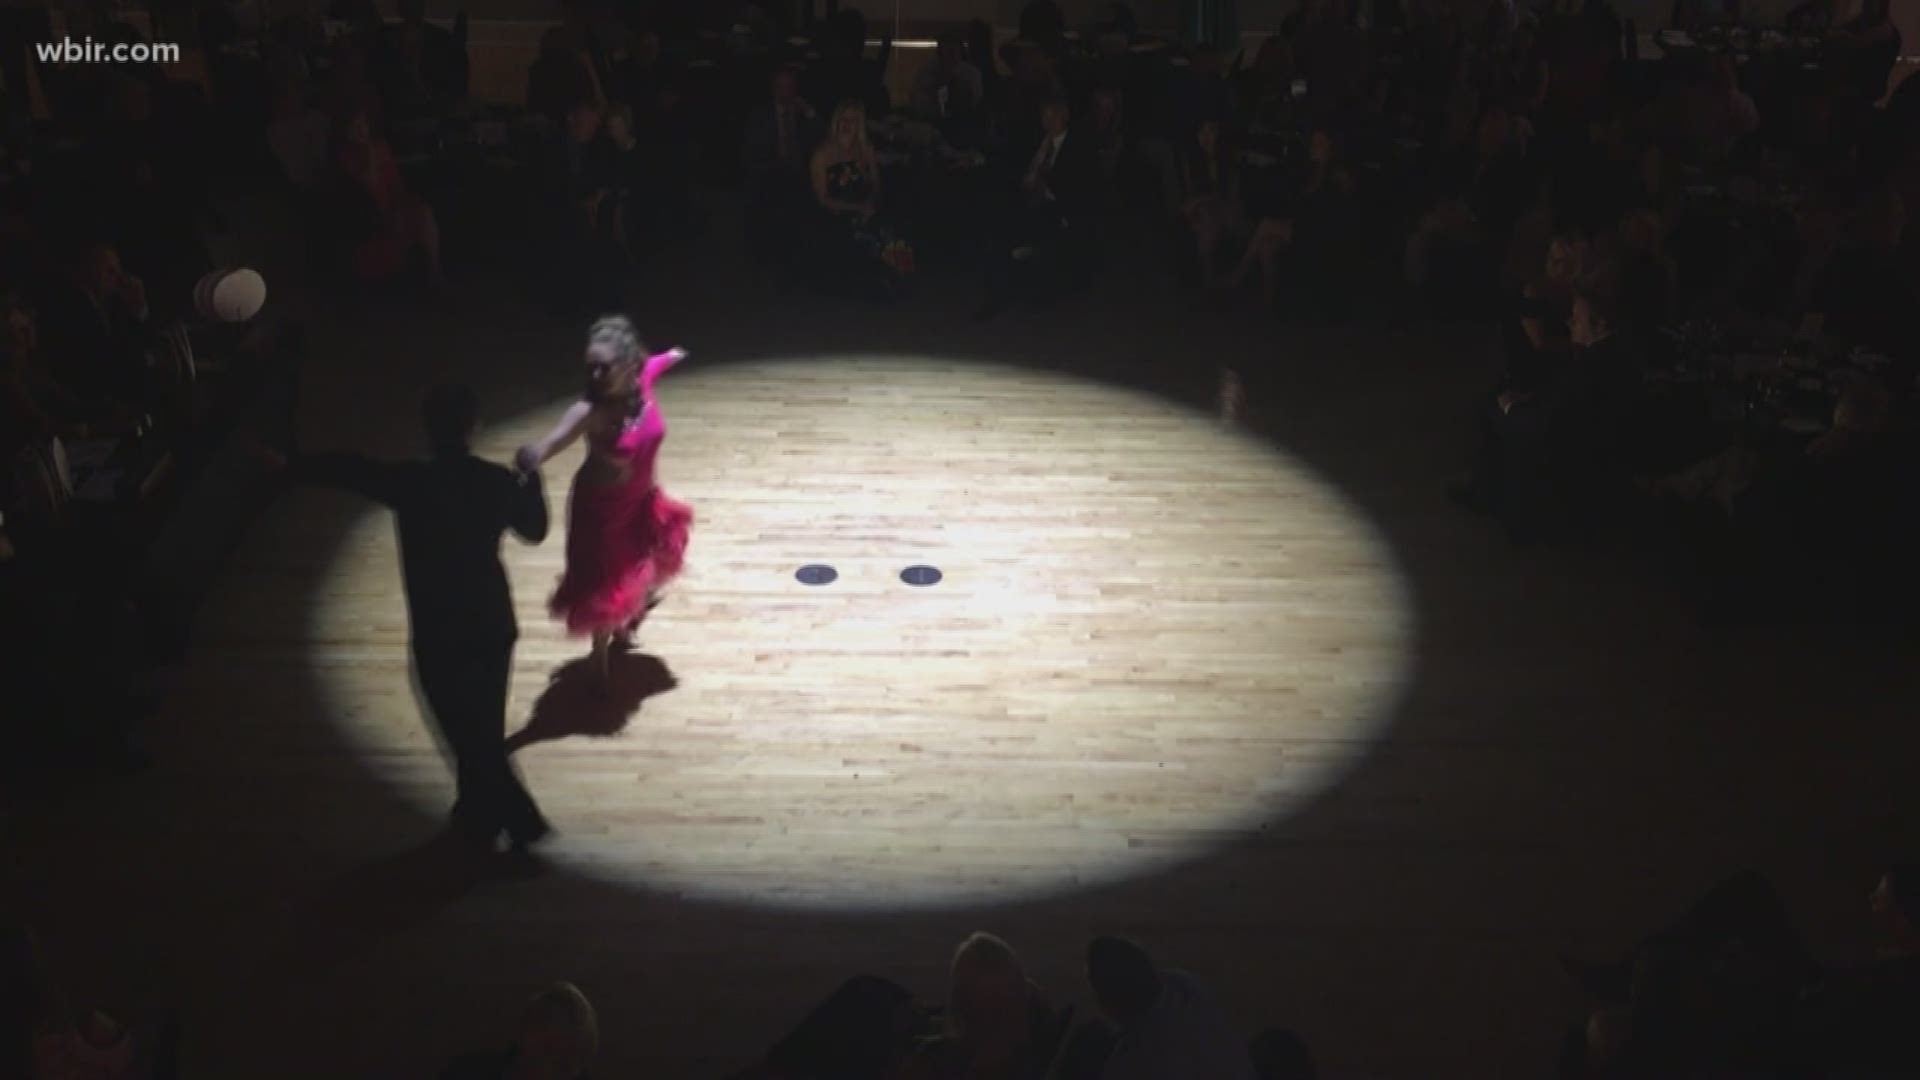 10News reporter Shannon Smith scored a perfect 10 at "Dancing for the Horses."